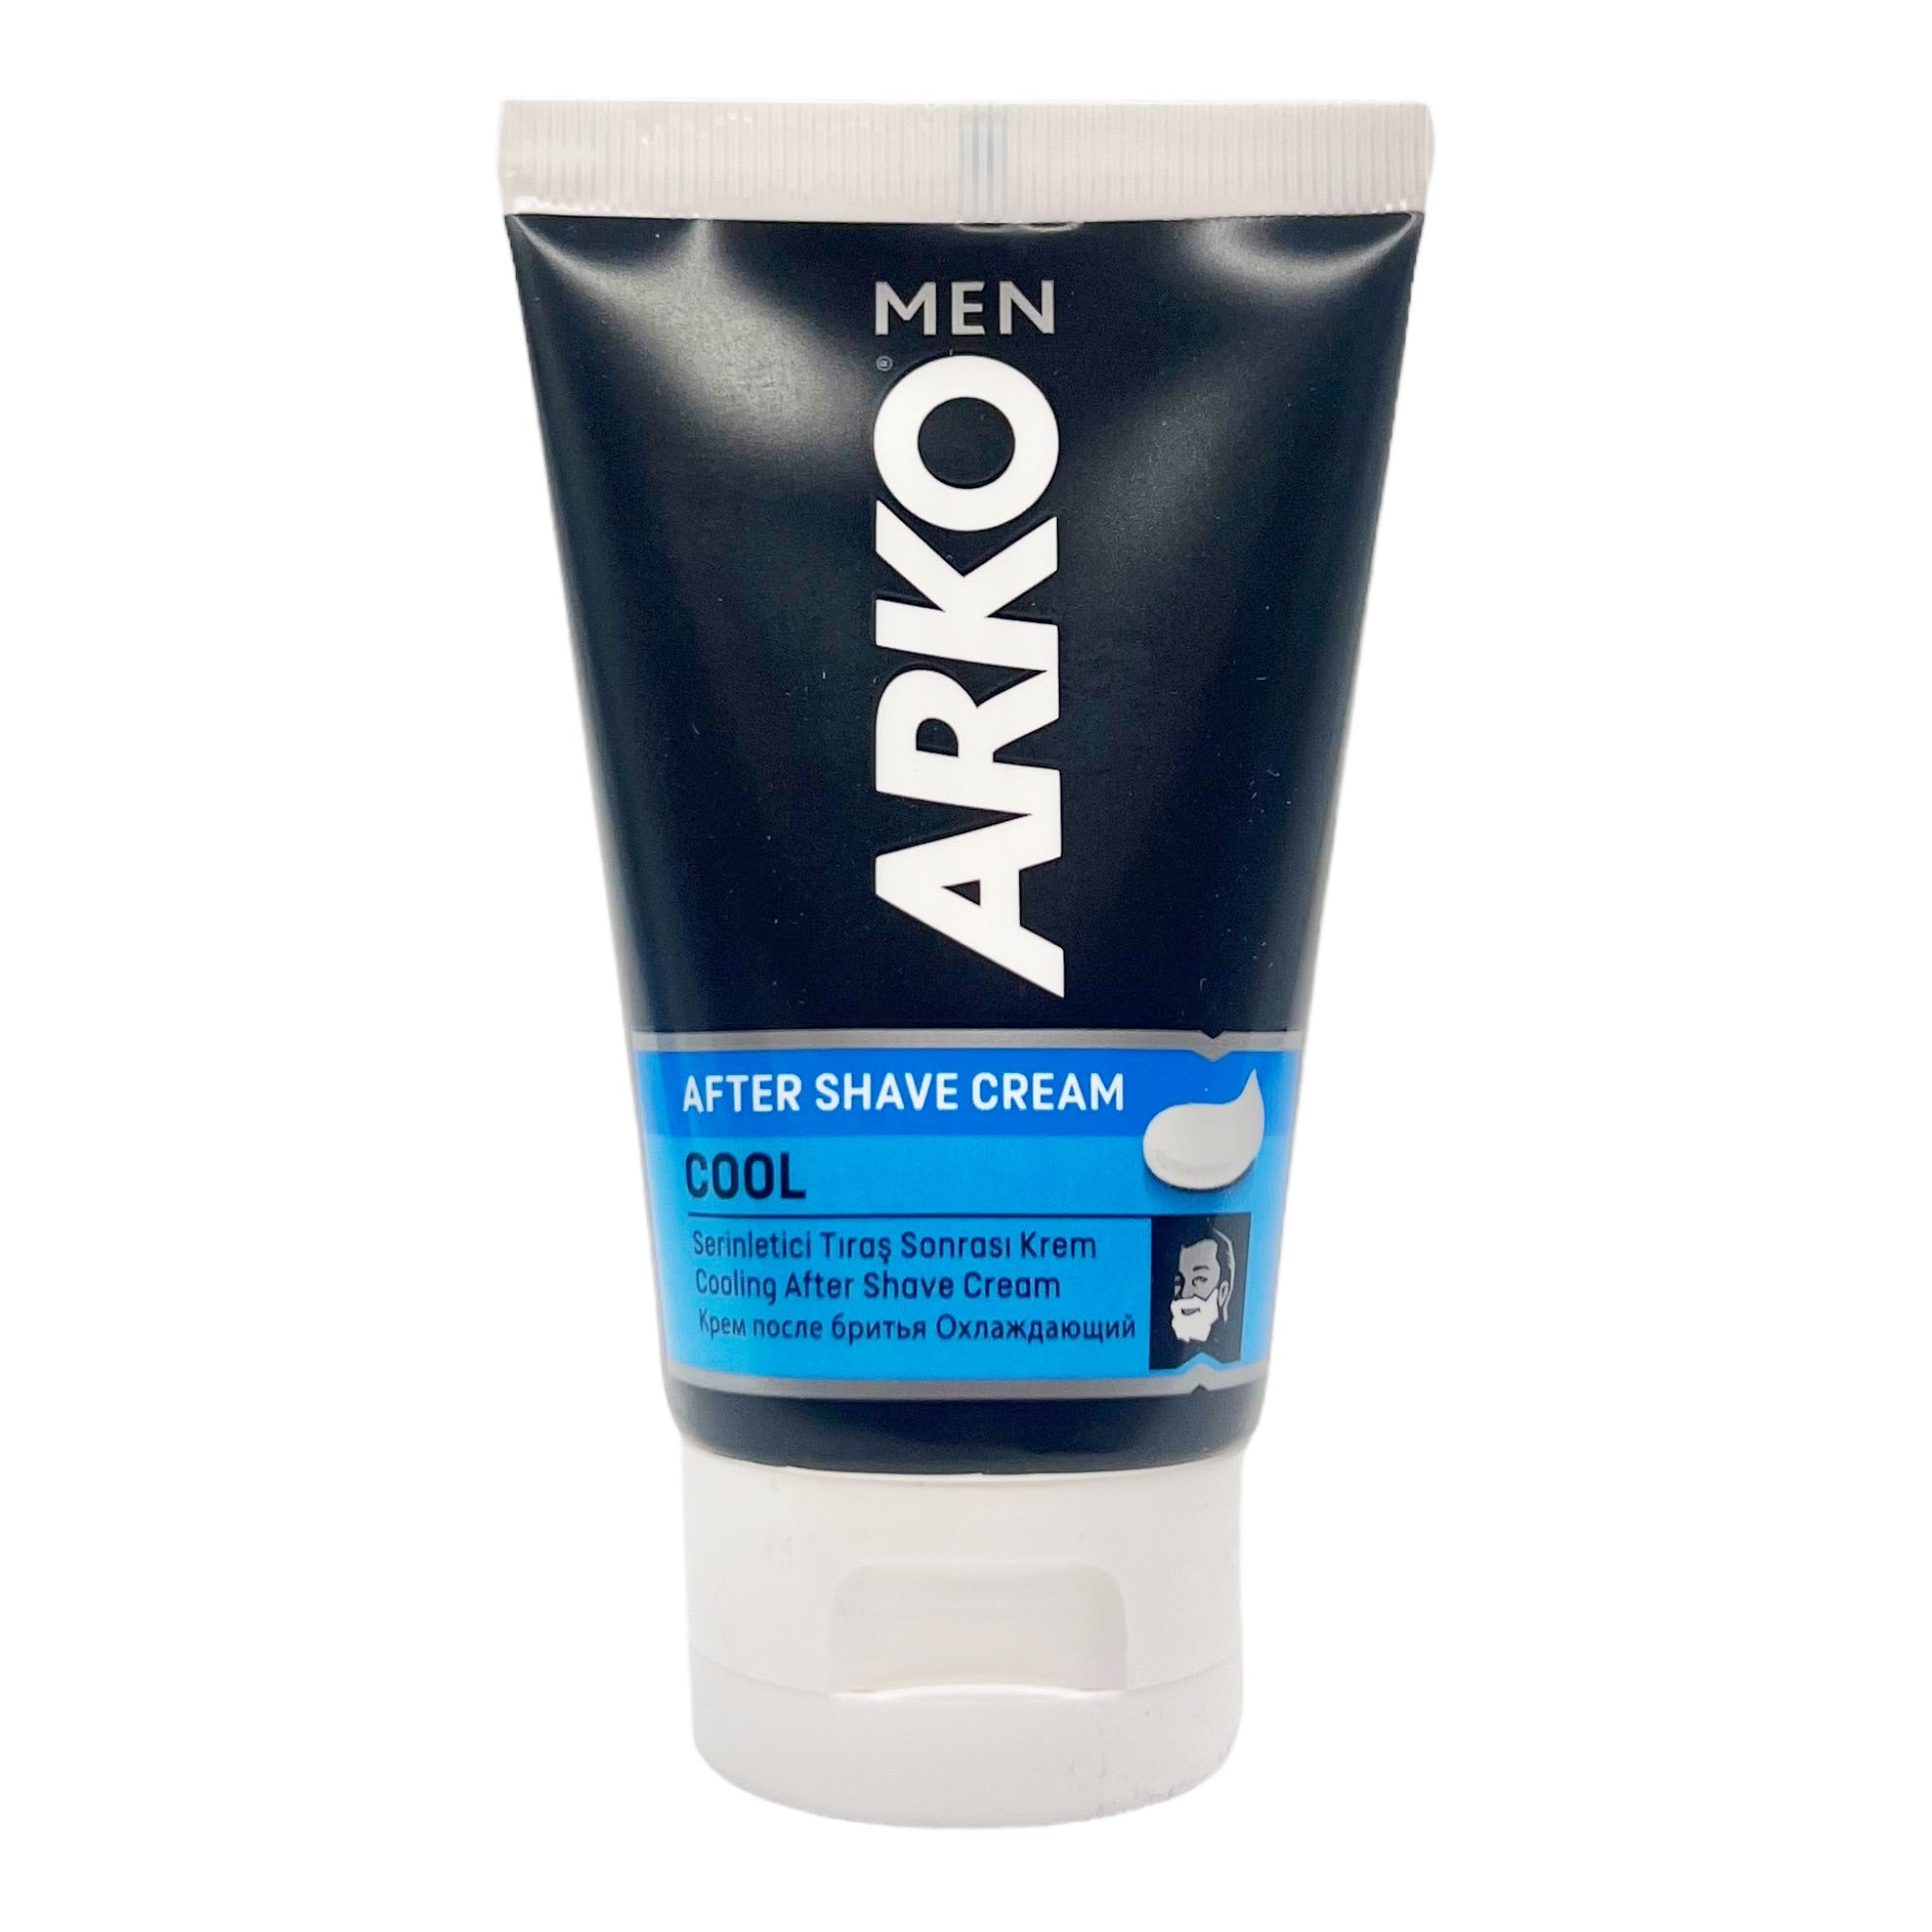 Arko - Men After Shave Cream Cool 50ml - Eson Direct